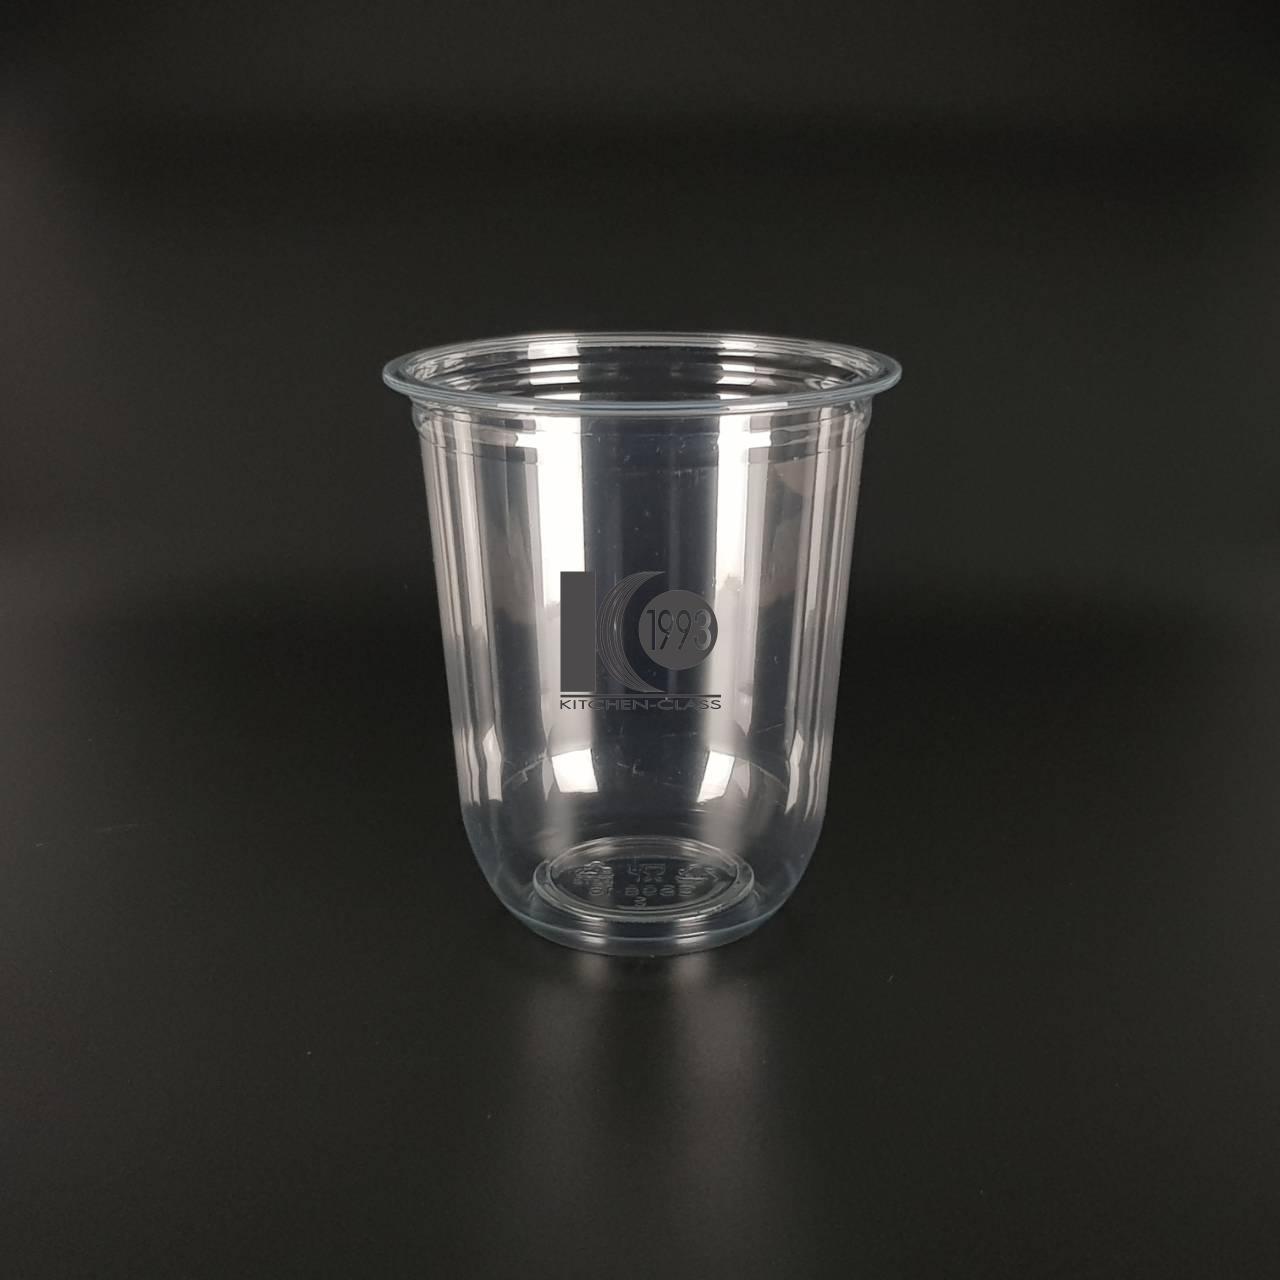 16 oz. Clear PP Plastic Cups